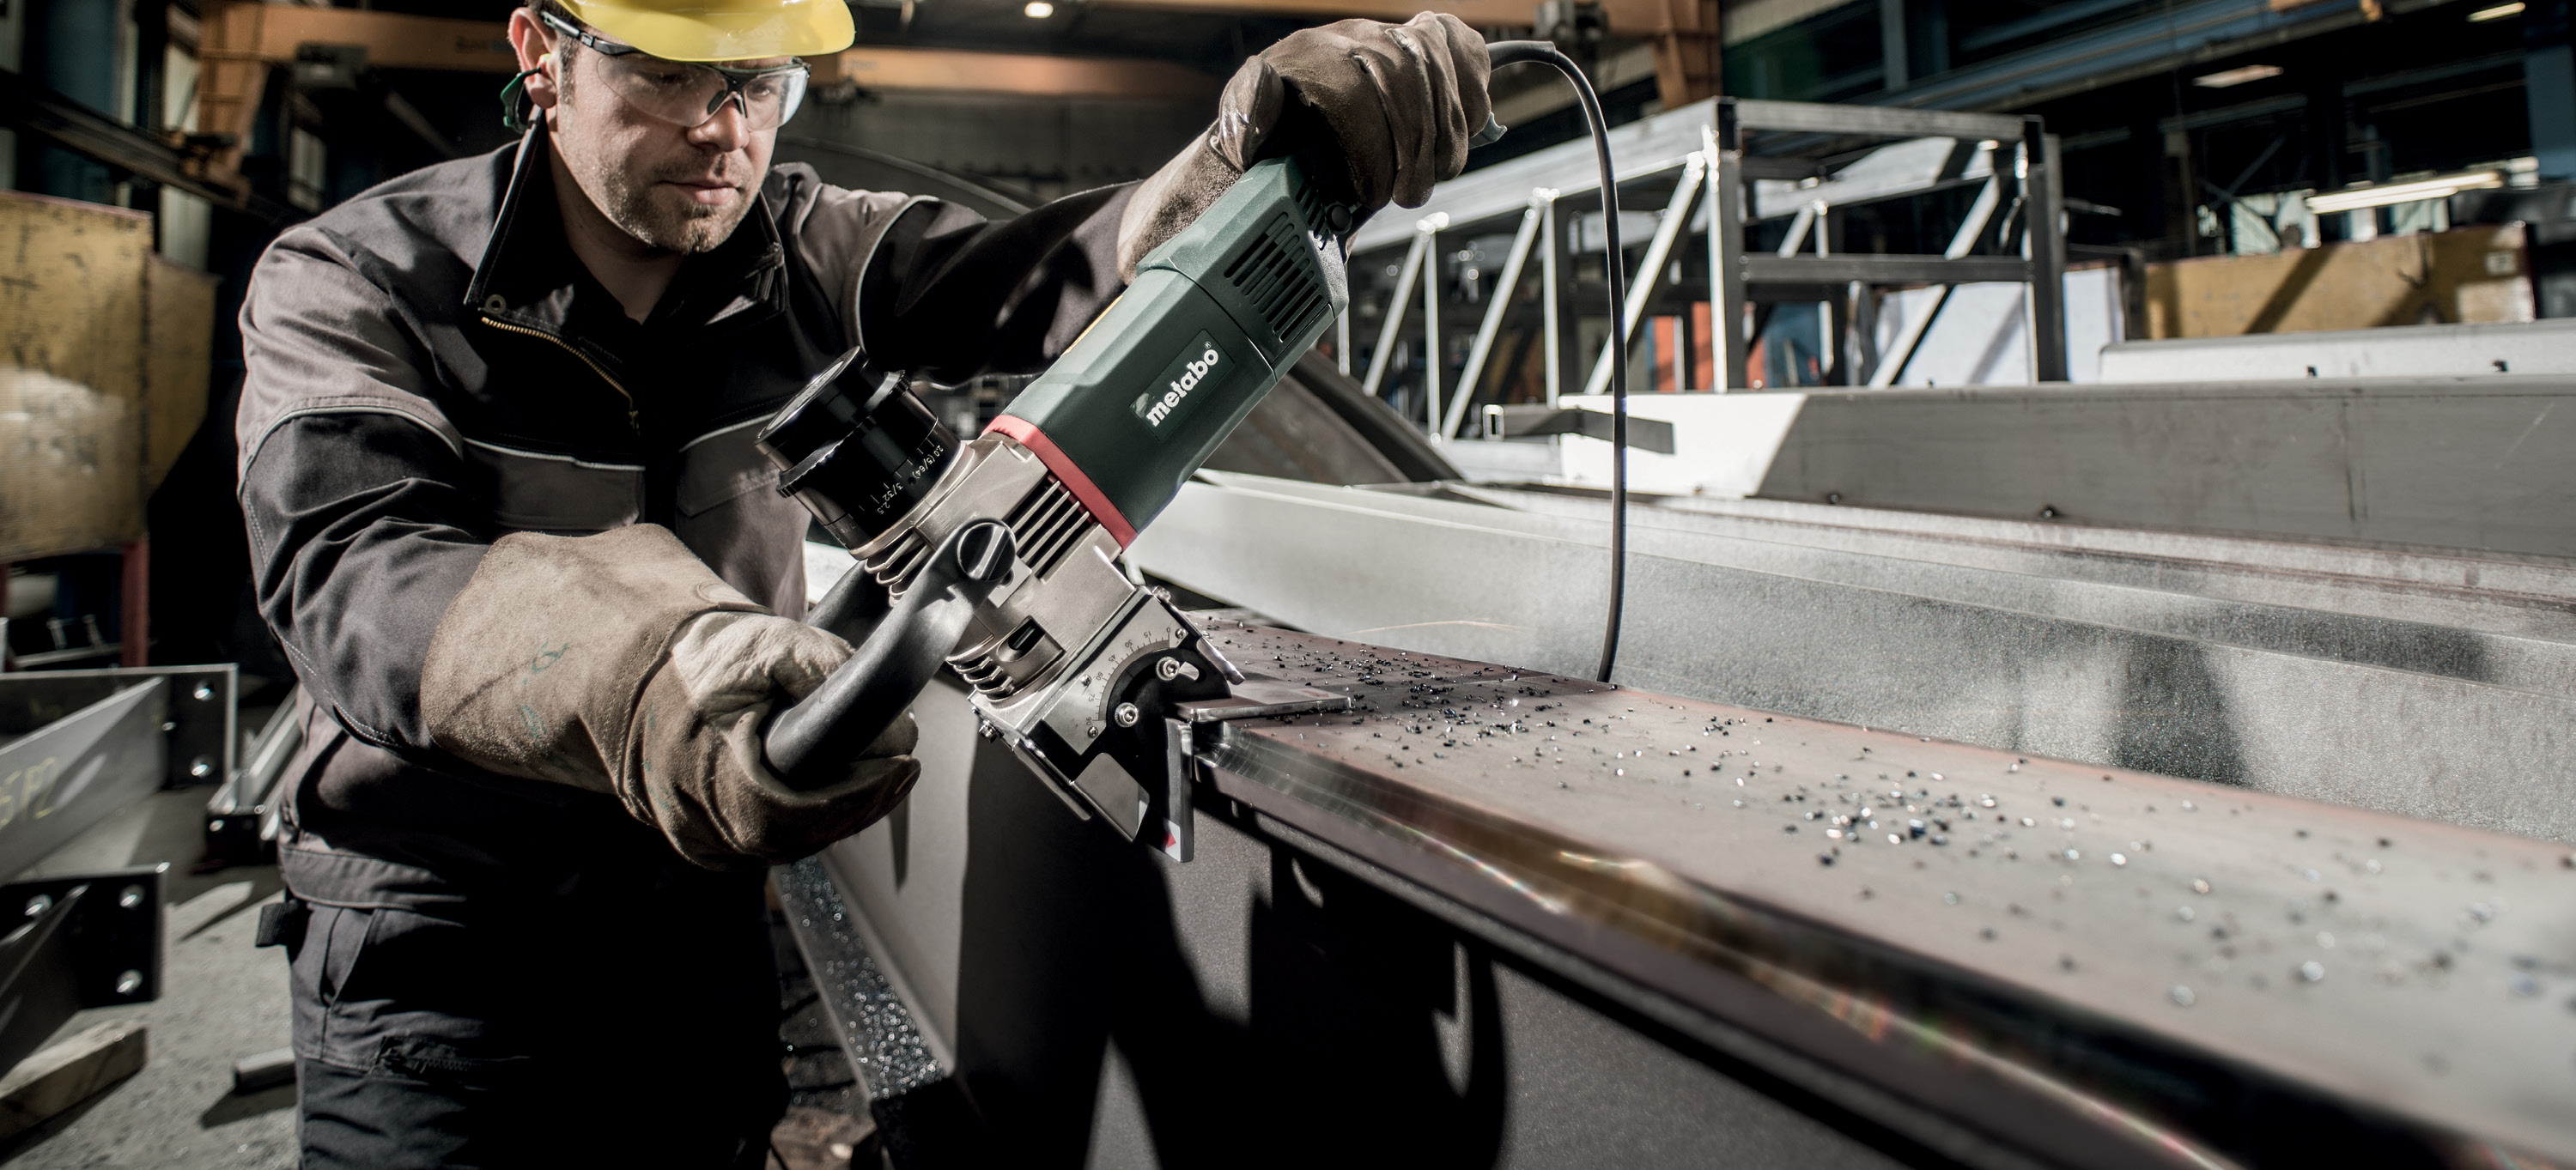 Metabo - Power Tools for professional users